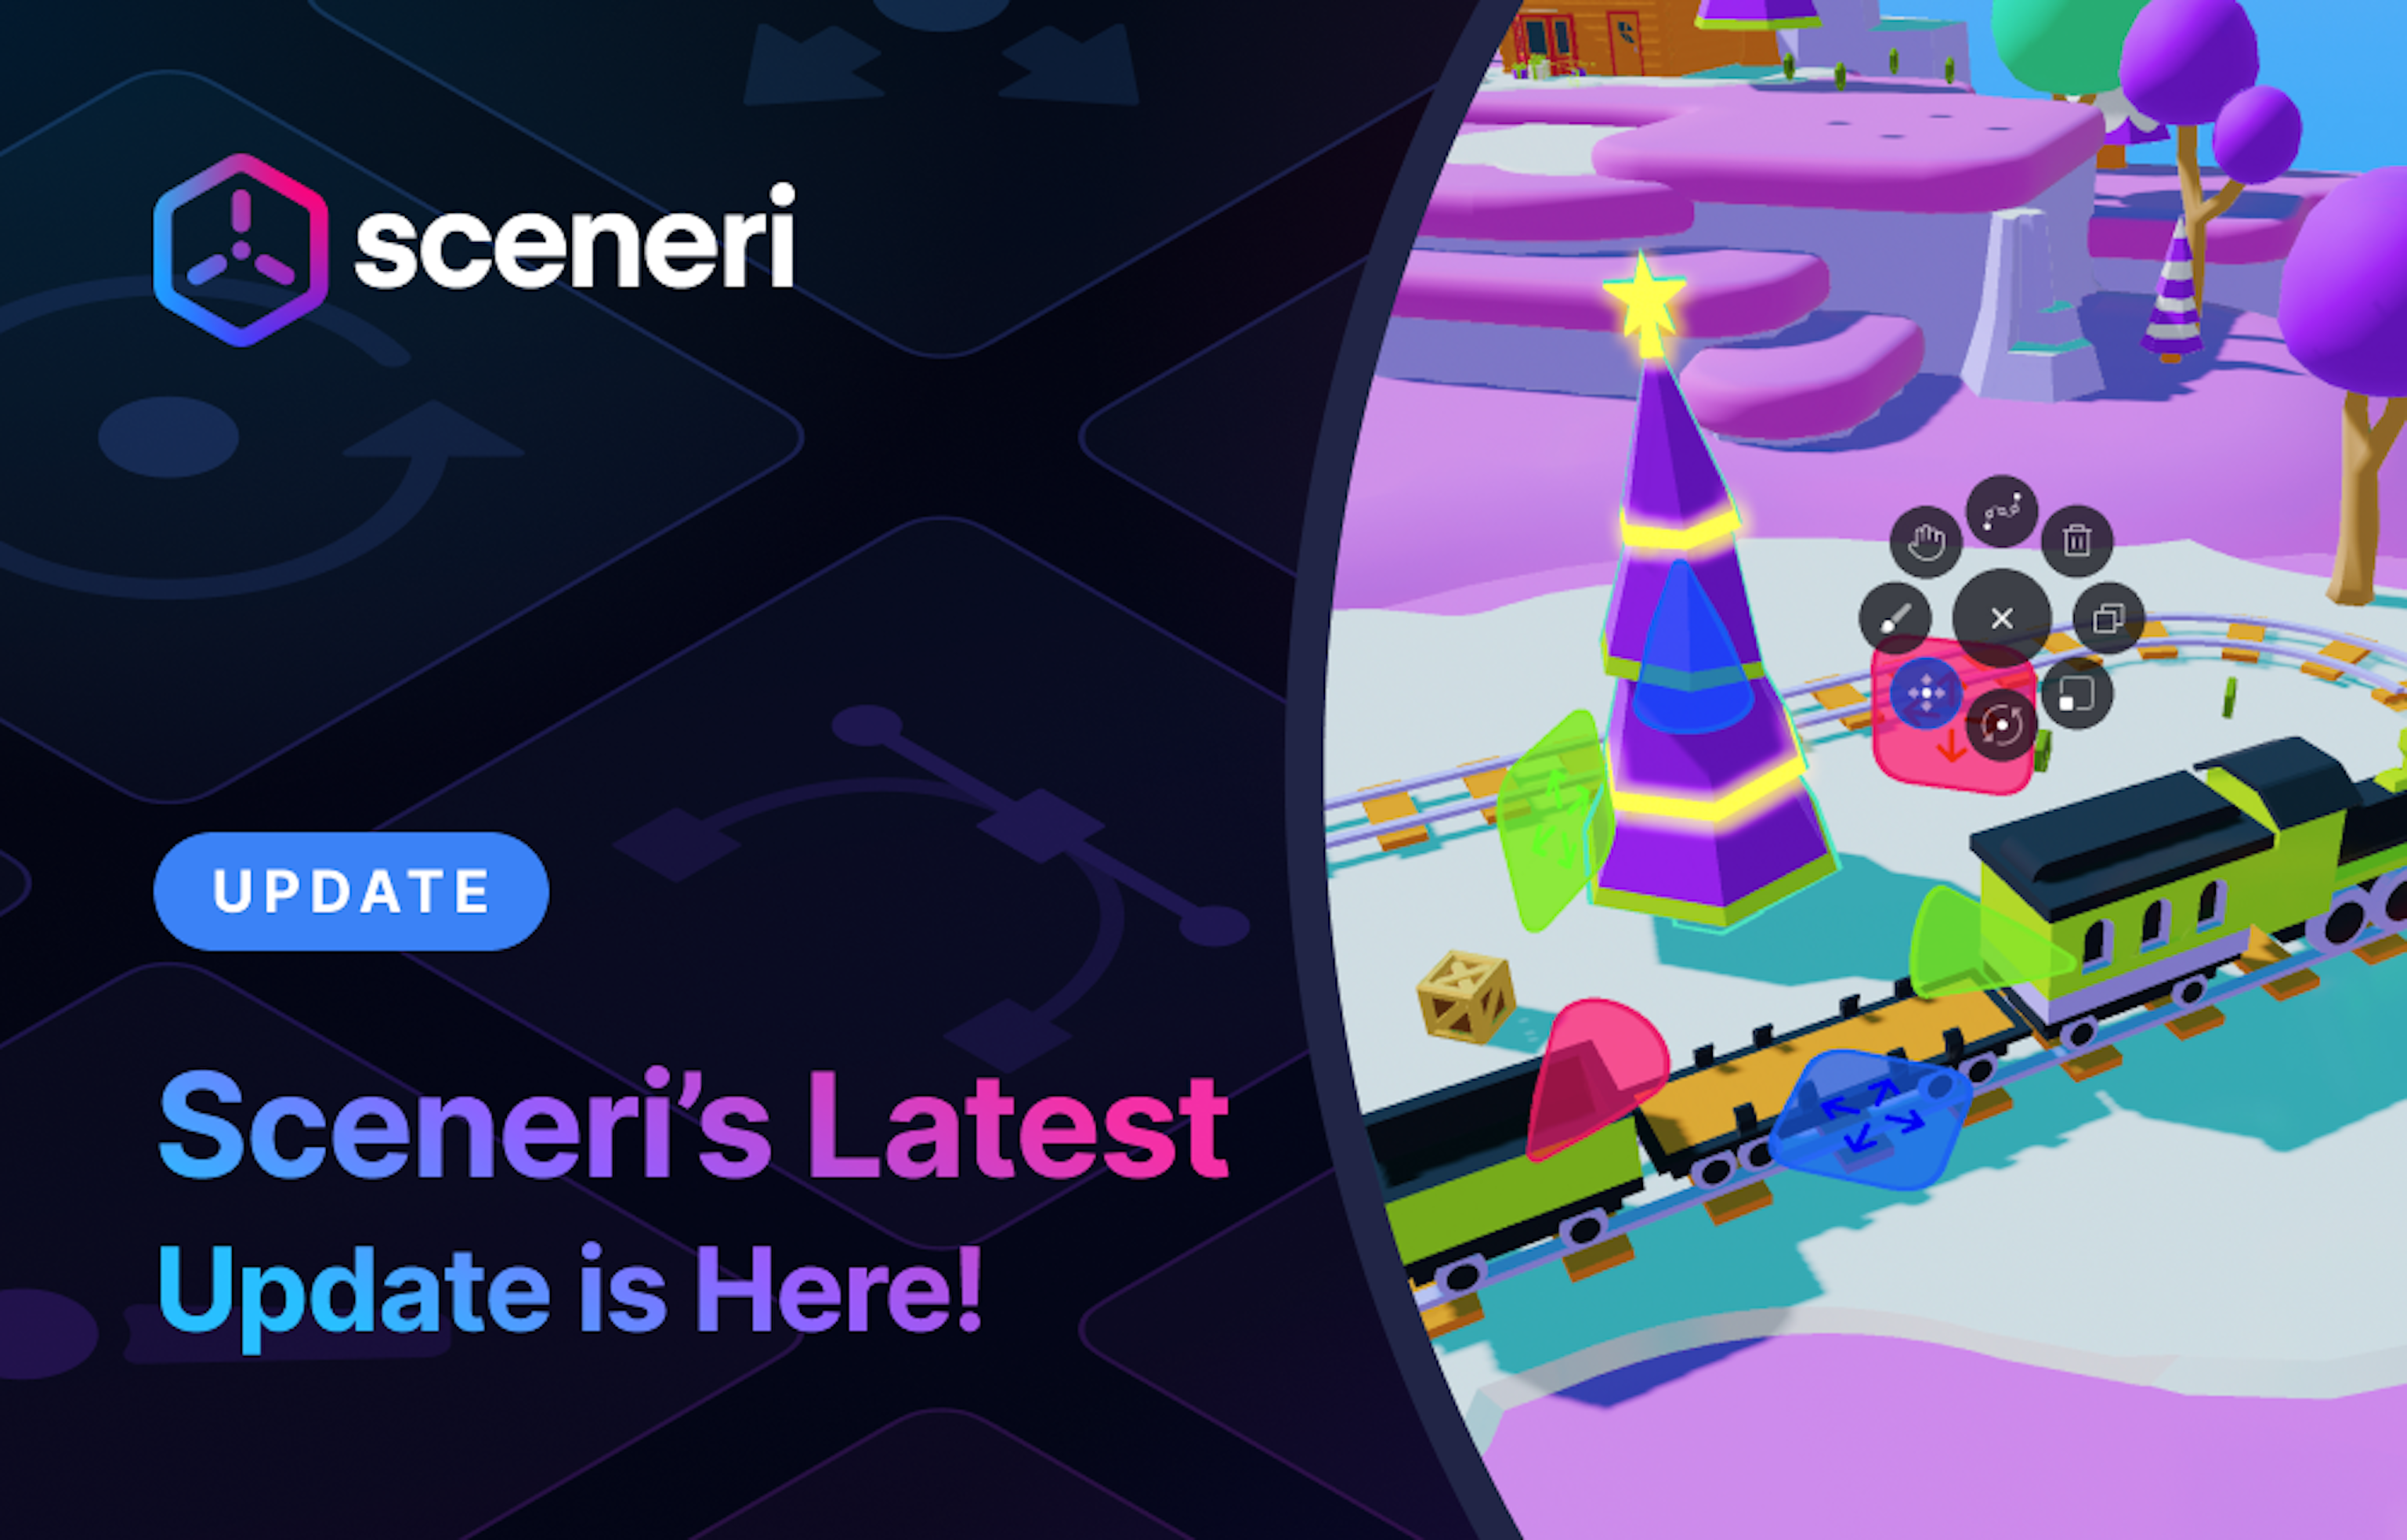 Going Global! Sceneri's Latest Update is Here